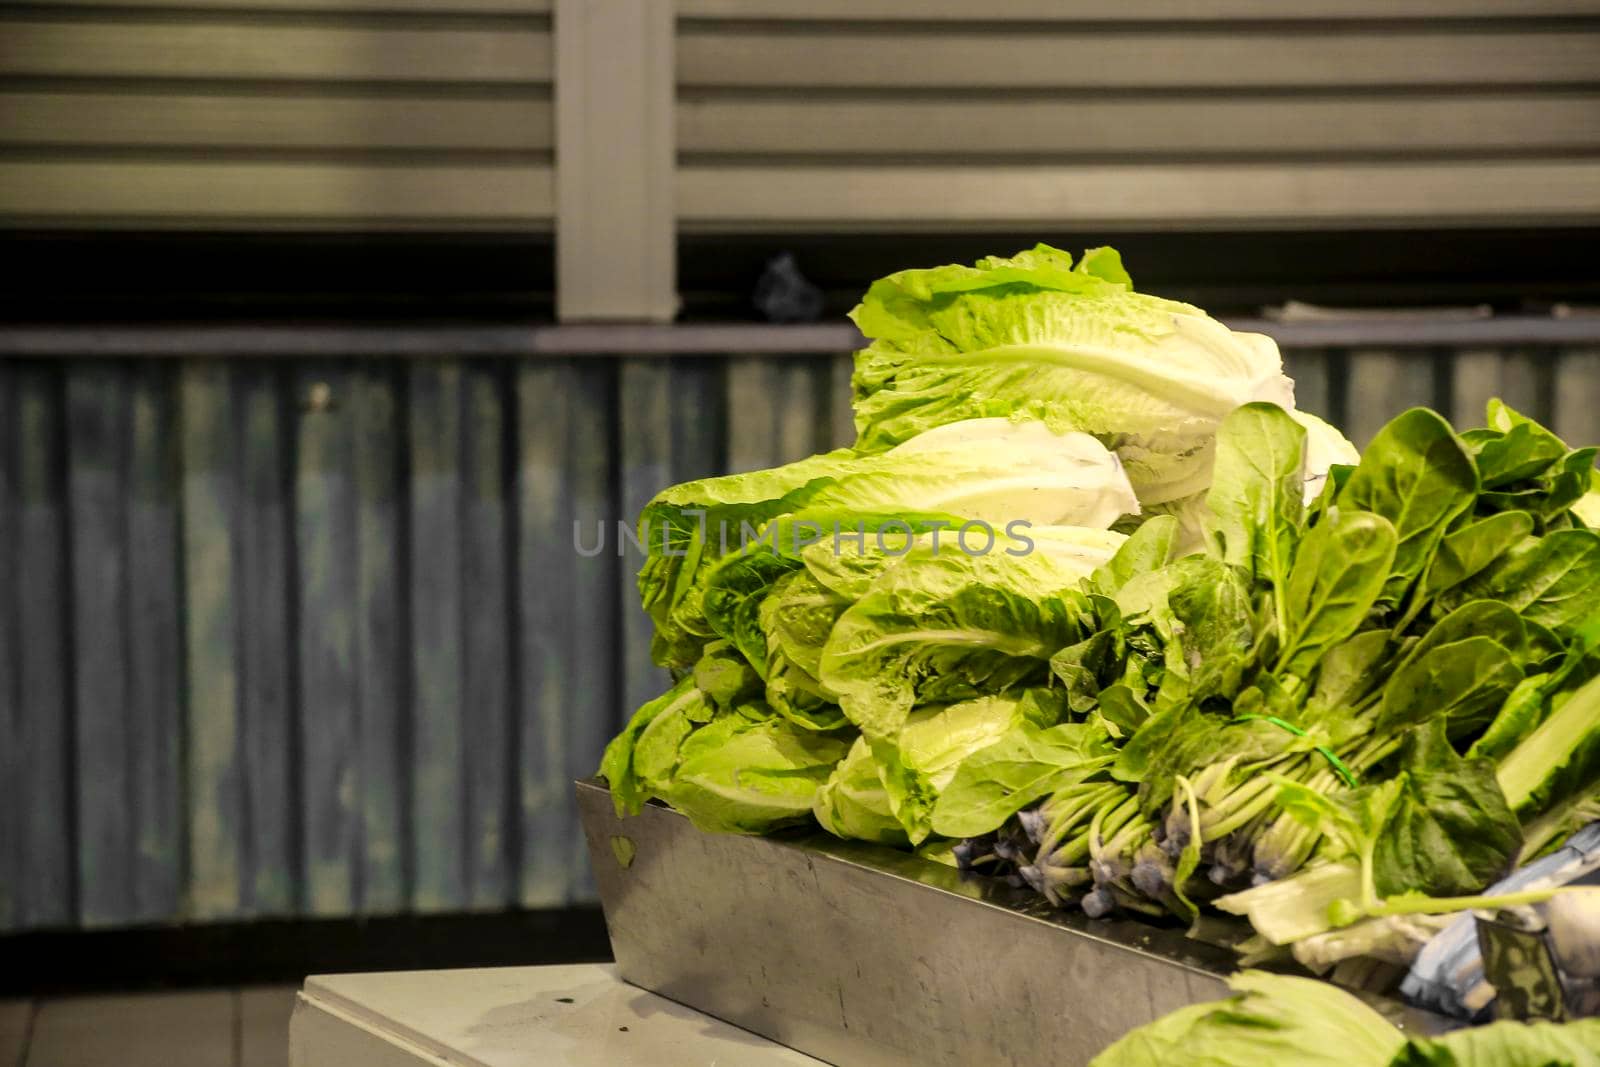 Lettuces for sale at a market stall in Alicante by soniabonet